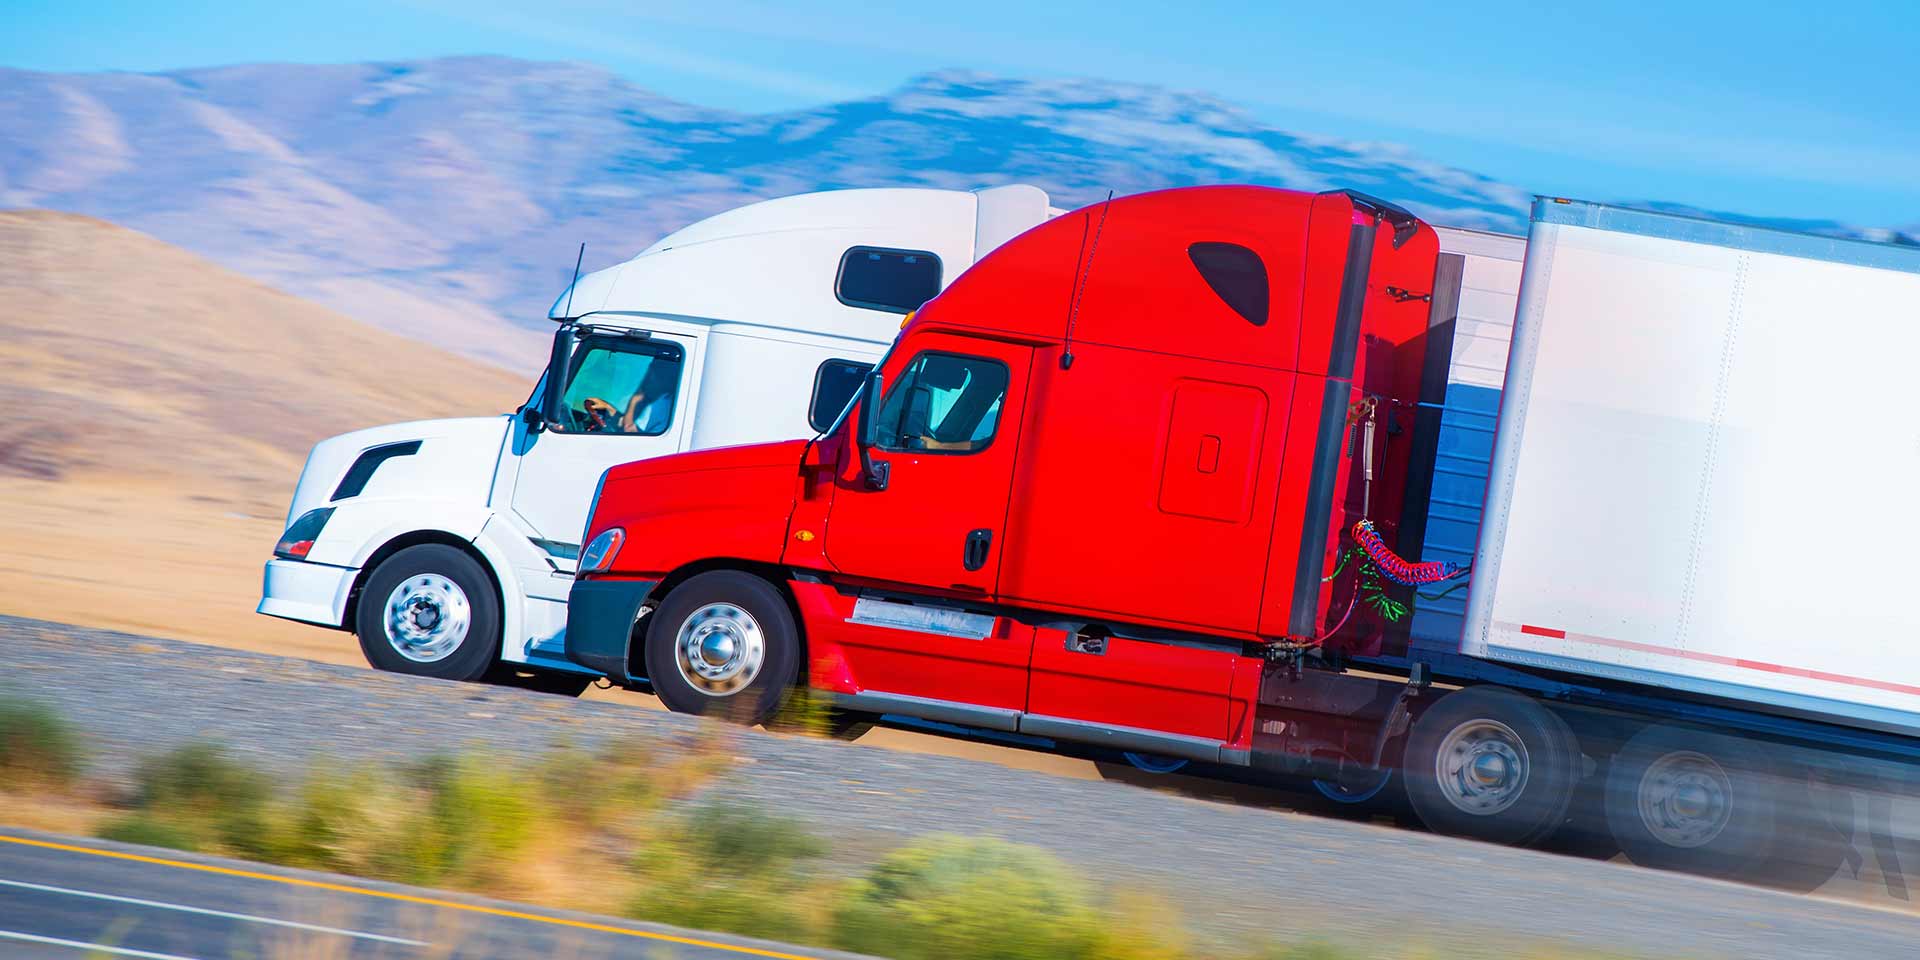 Livonia Trucking Services, Trucking Company and Freight Forwarding Services